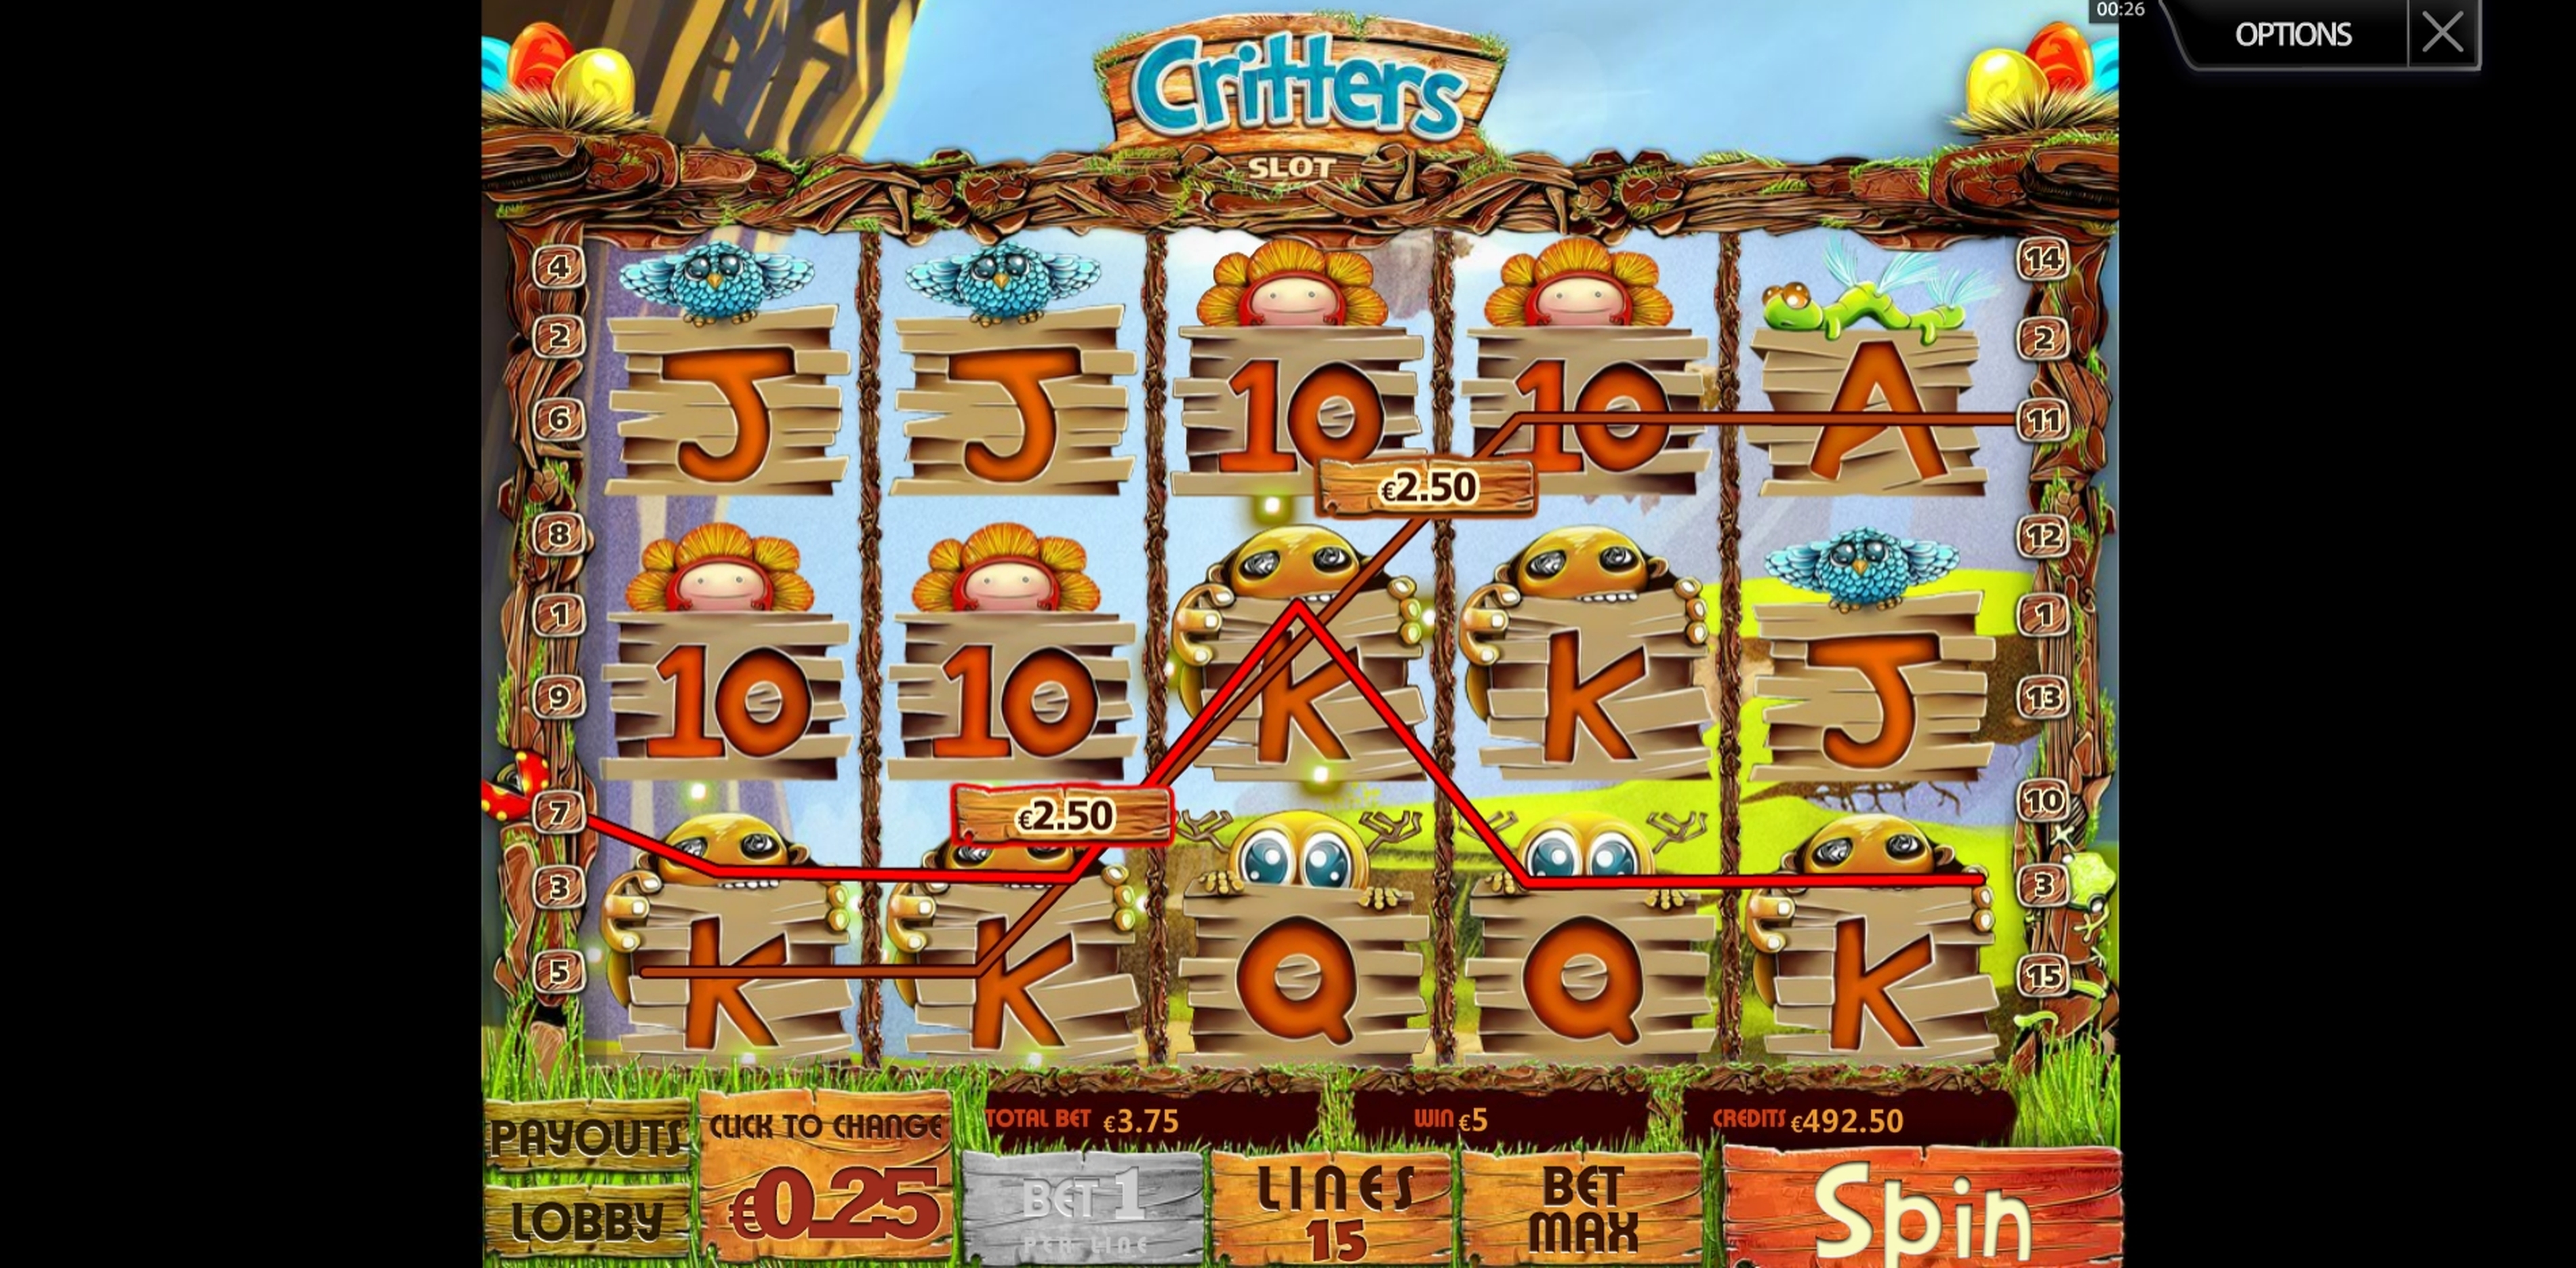 Win Money in Critters Free Slot Game by Multislot